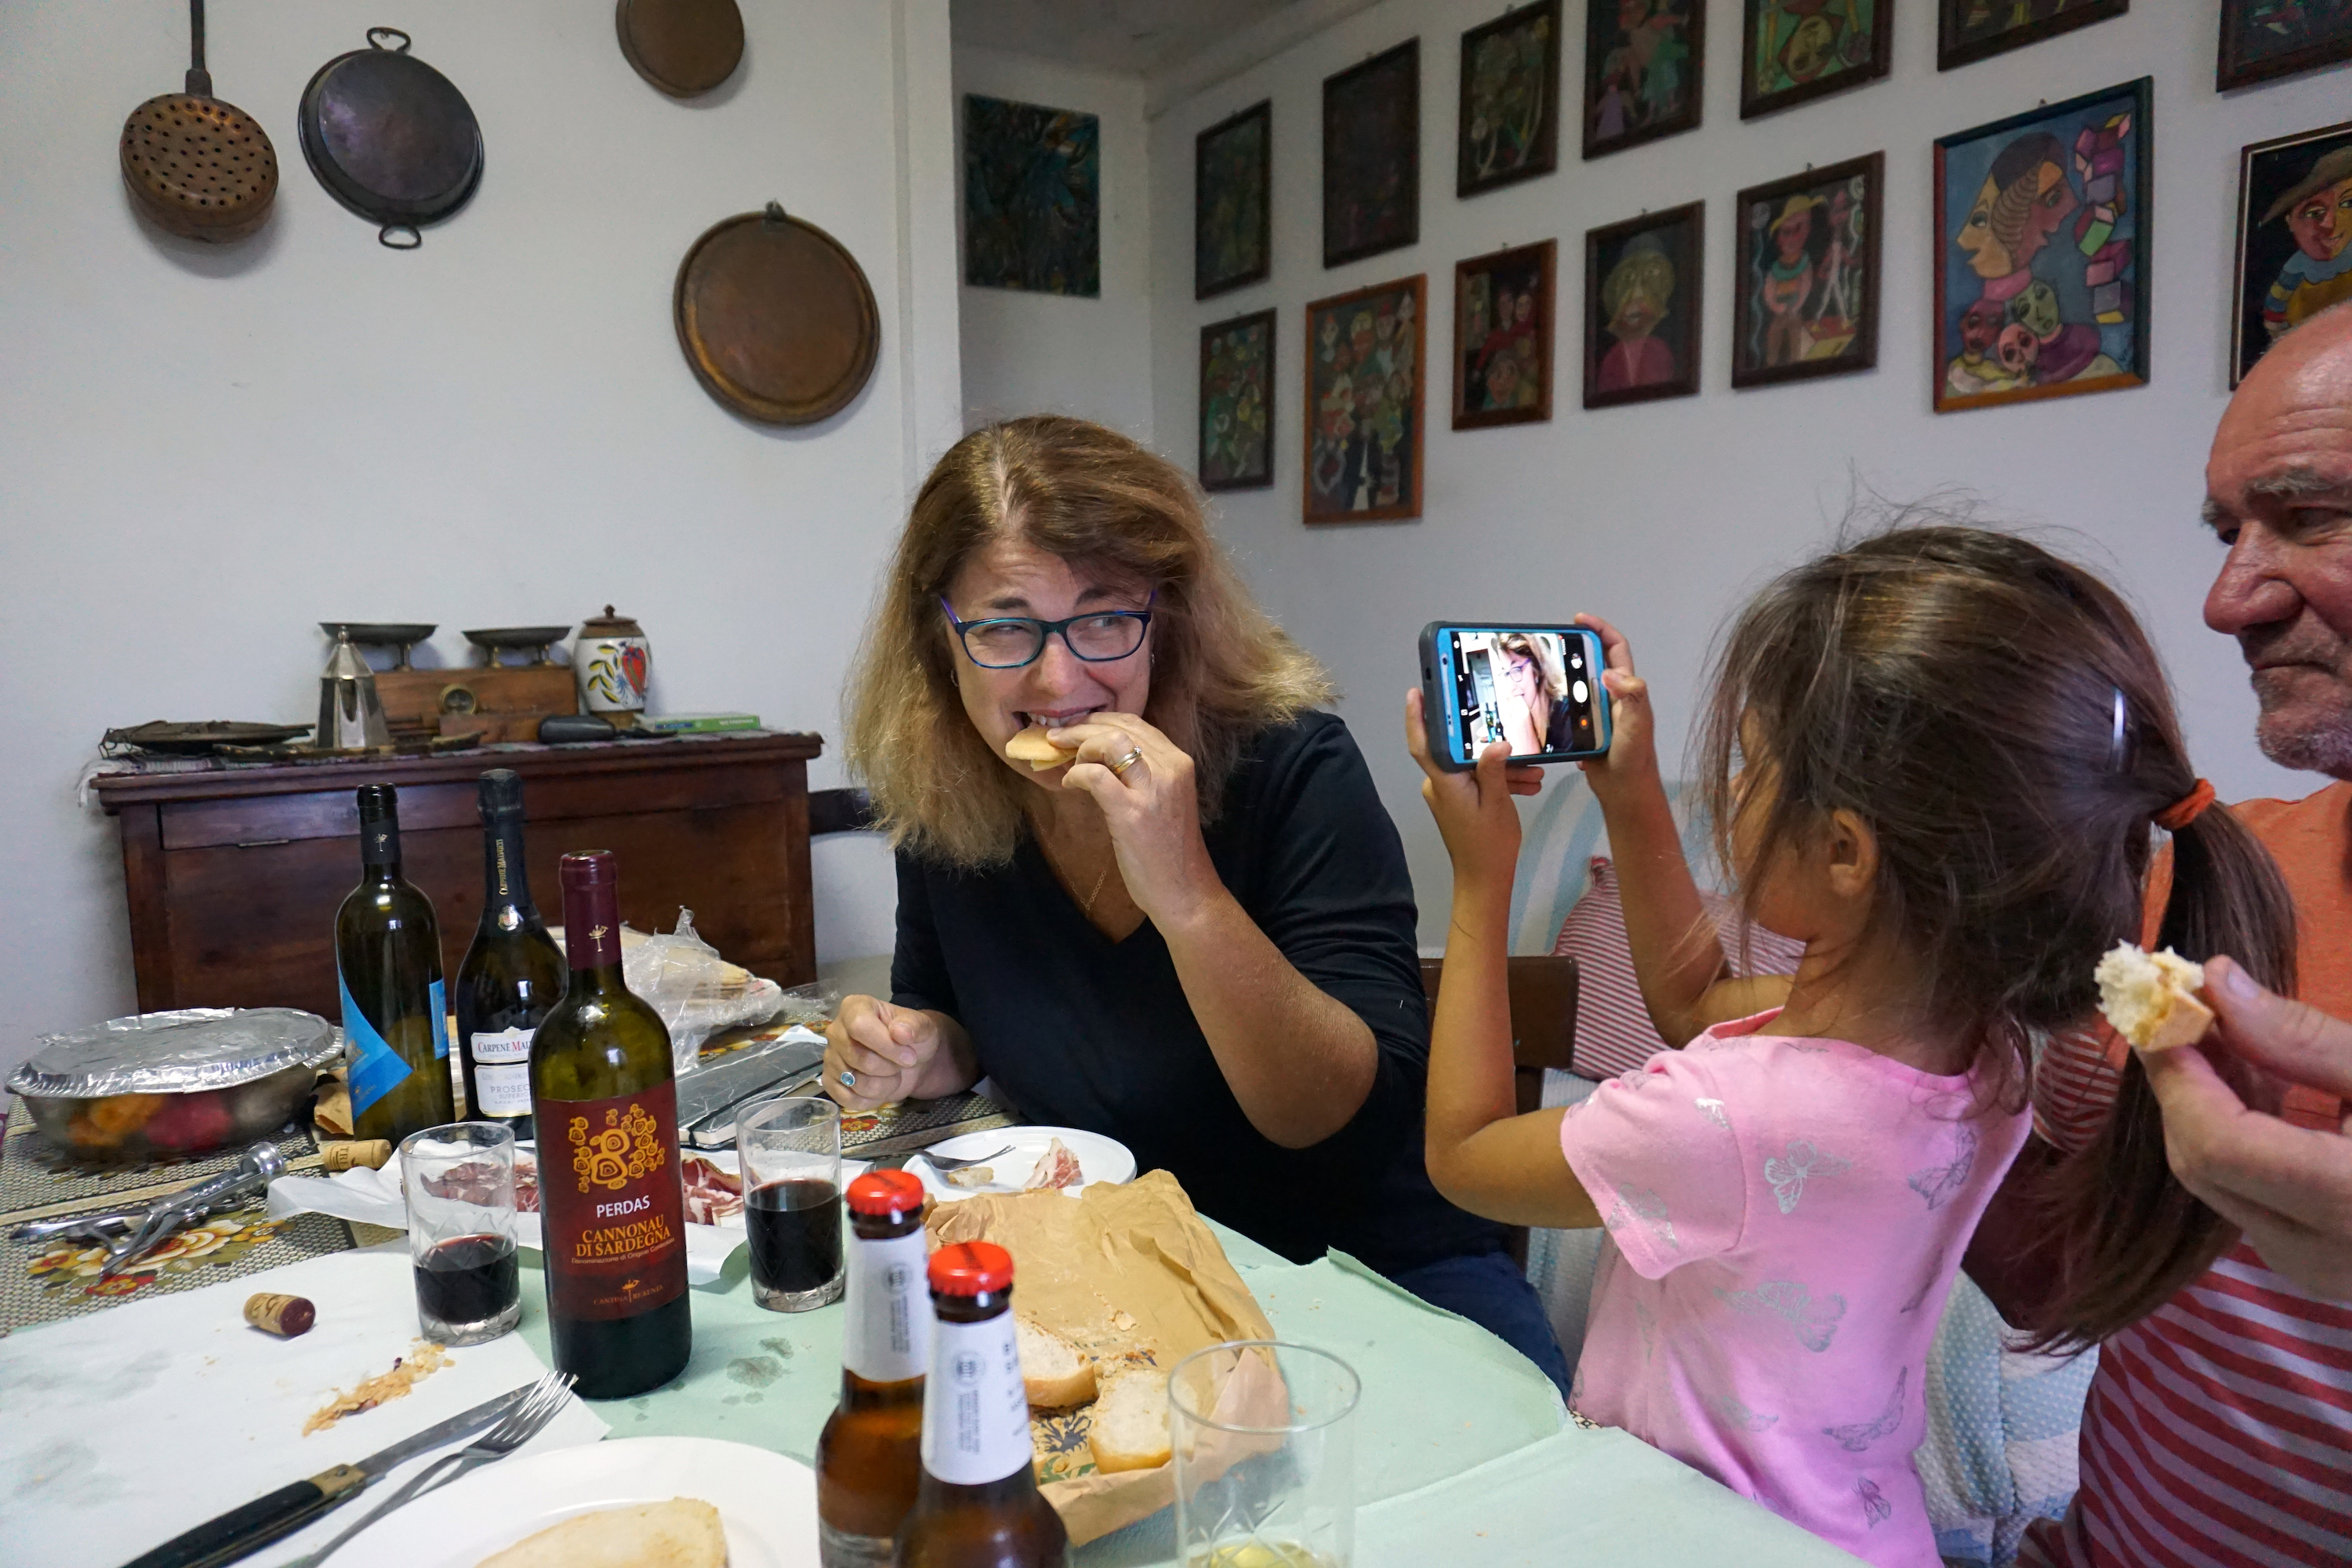 Woman eating cheese while a child takes her picture.